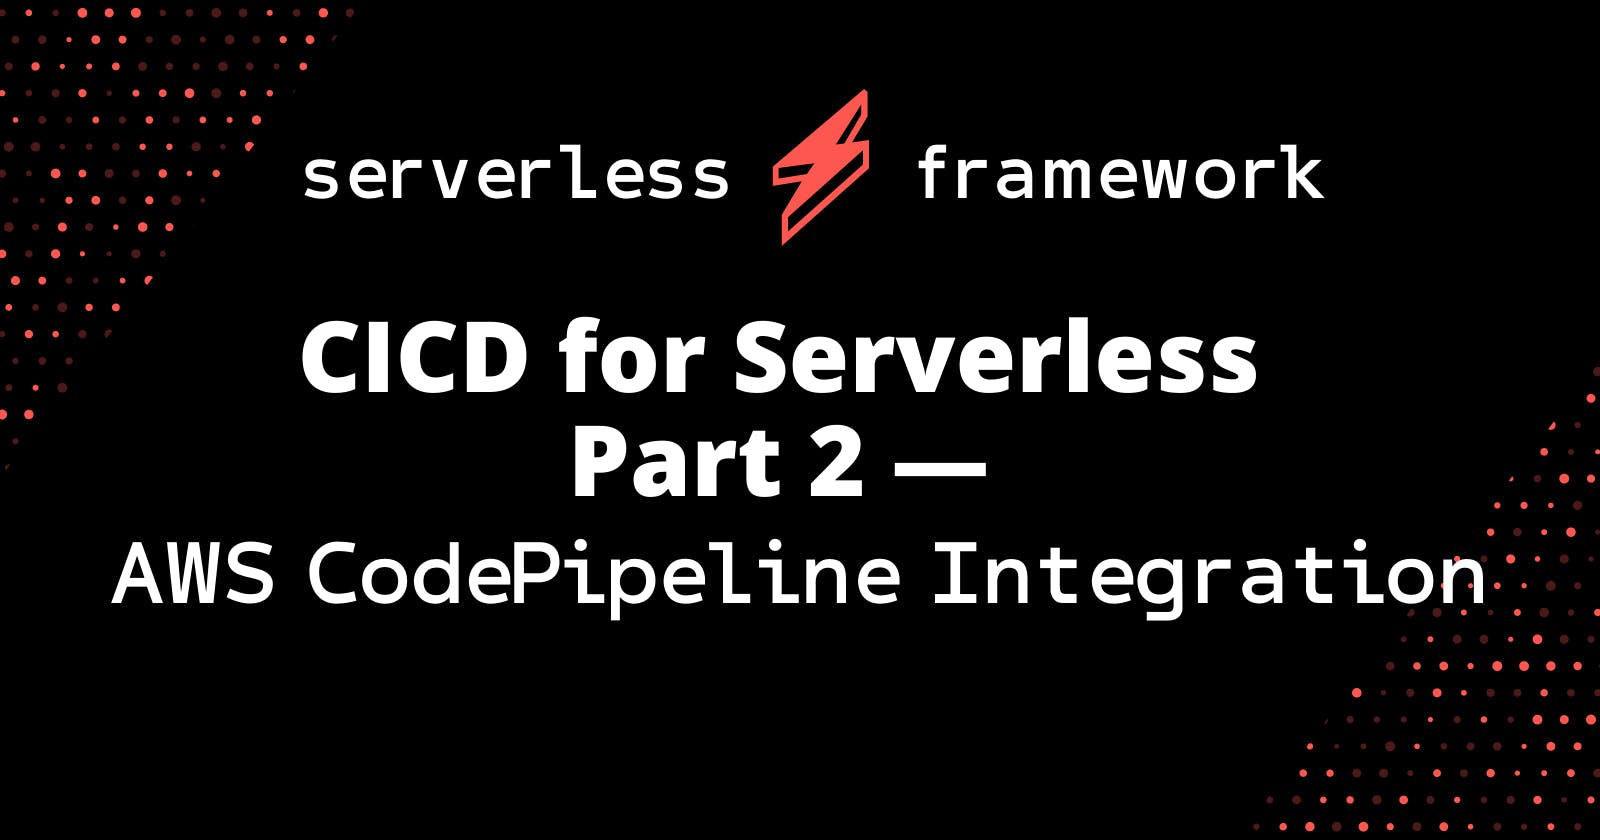 CICD for Serverless Part 2 — AWS CodePipeline Integration